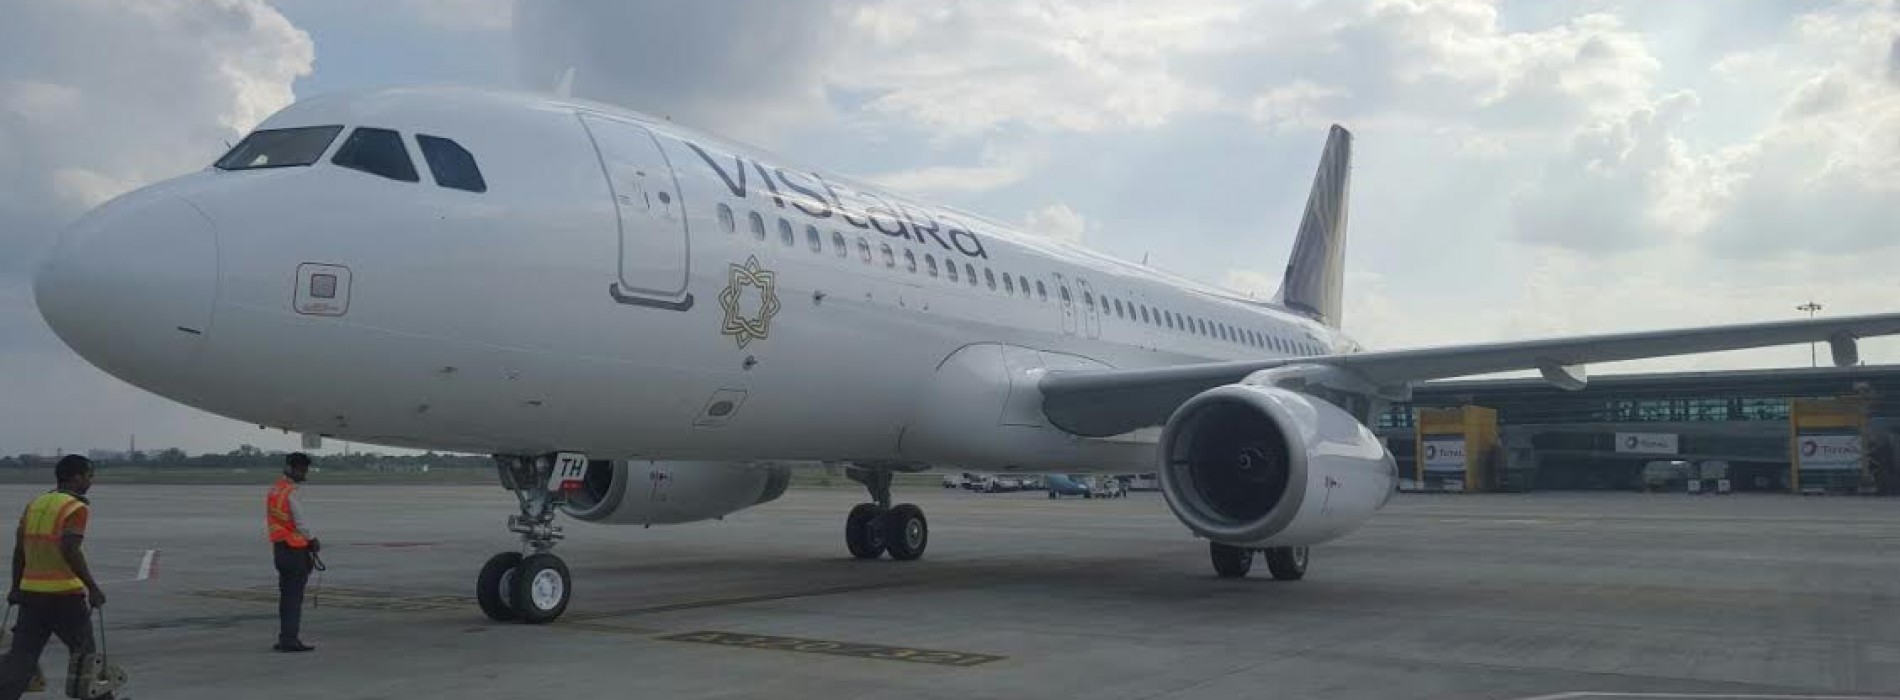 Vistara welcomes seventh Airbus A-320 in its existing fleet of six aircraft